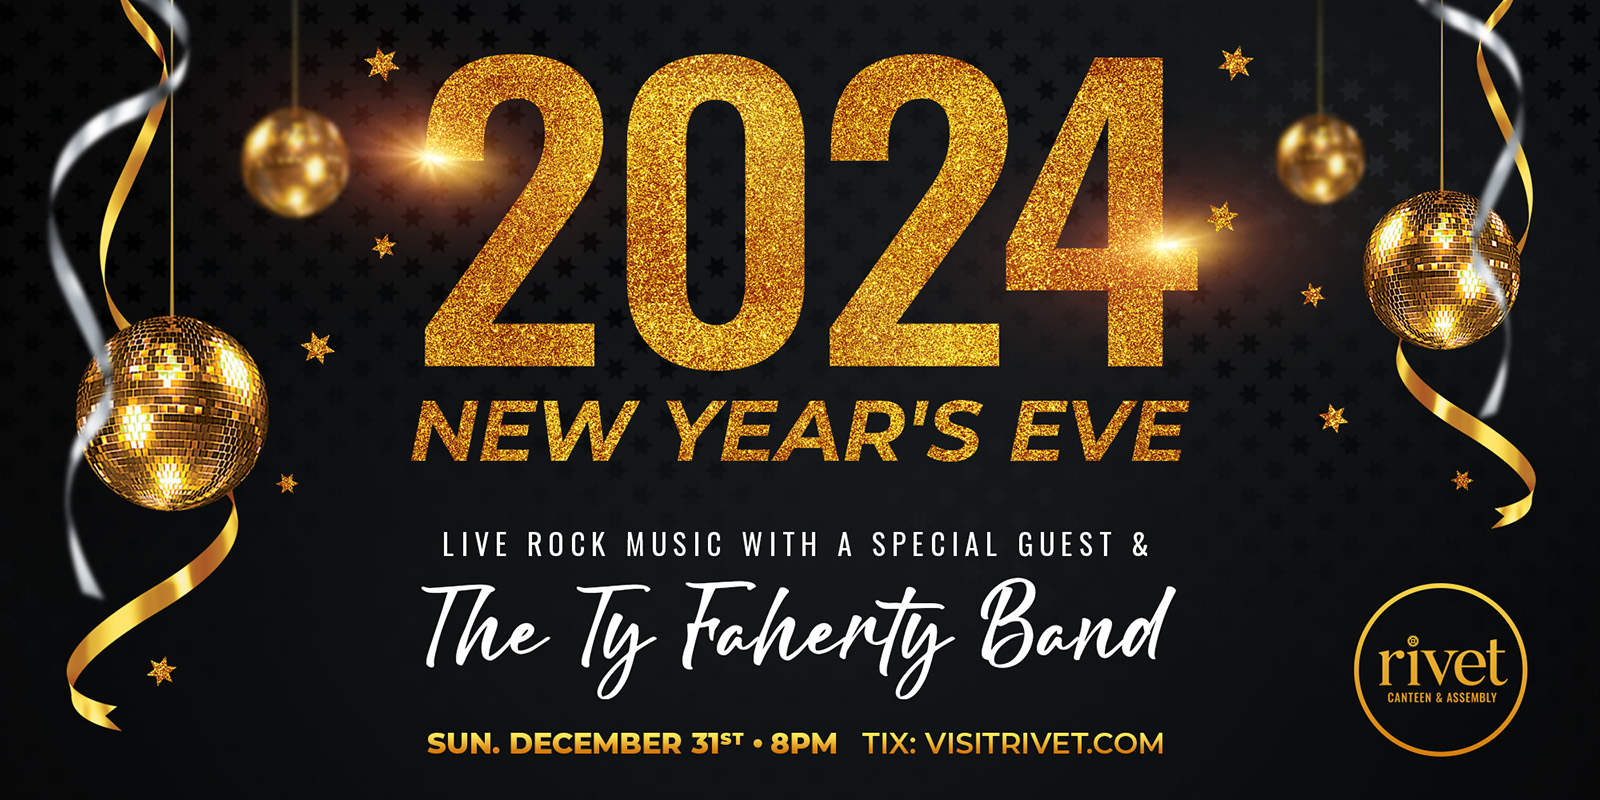 New Year's Eve celebration at Rivet: Canteen & Assembly with The Ty Faherty Band and a surprise special guest on Sunday, December 31st, 2023. Join us!